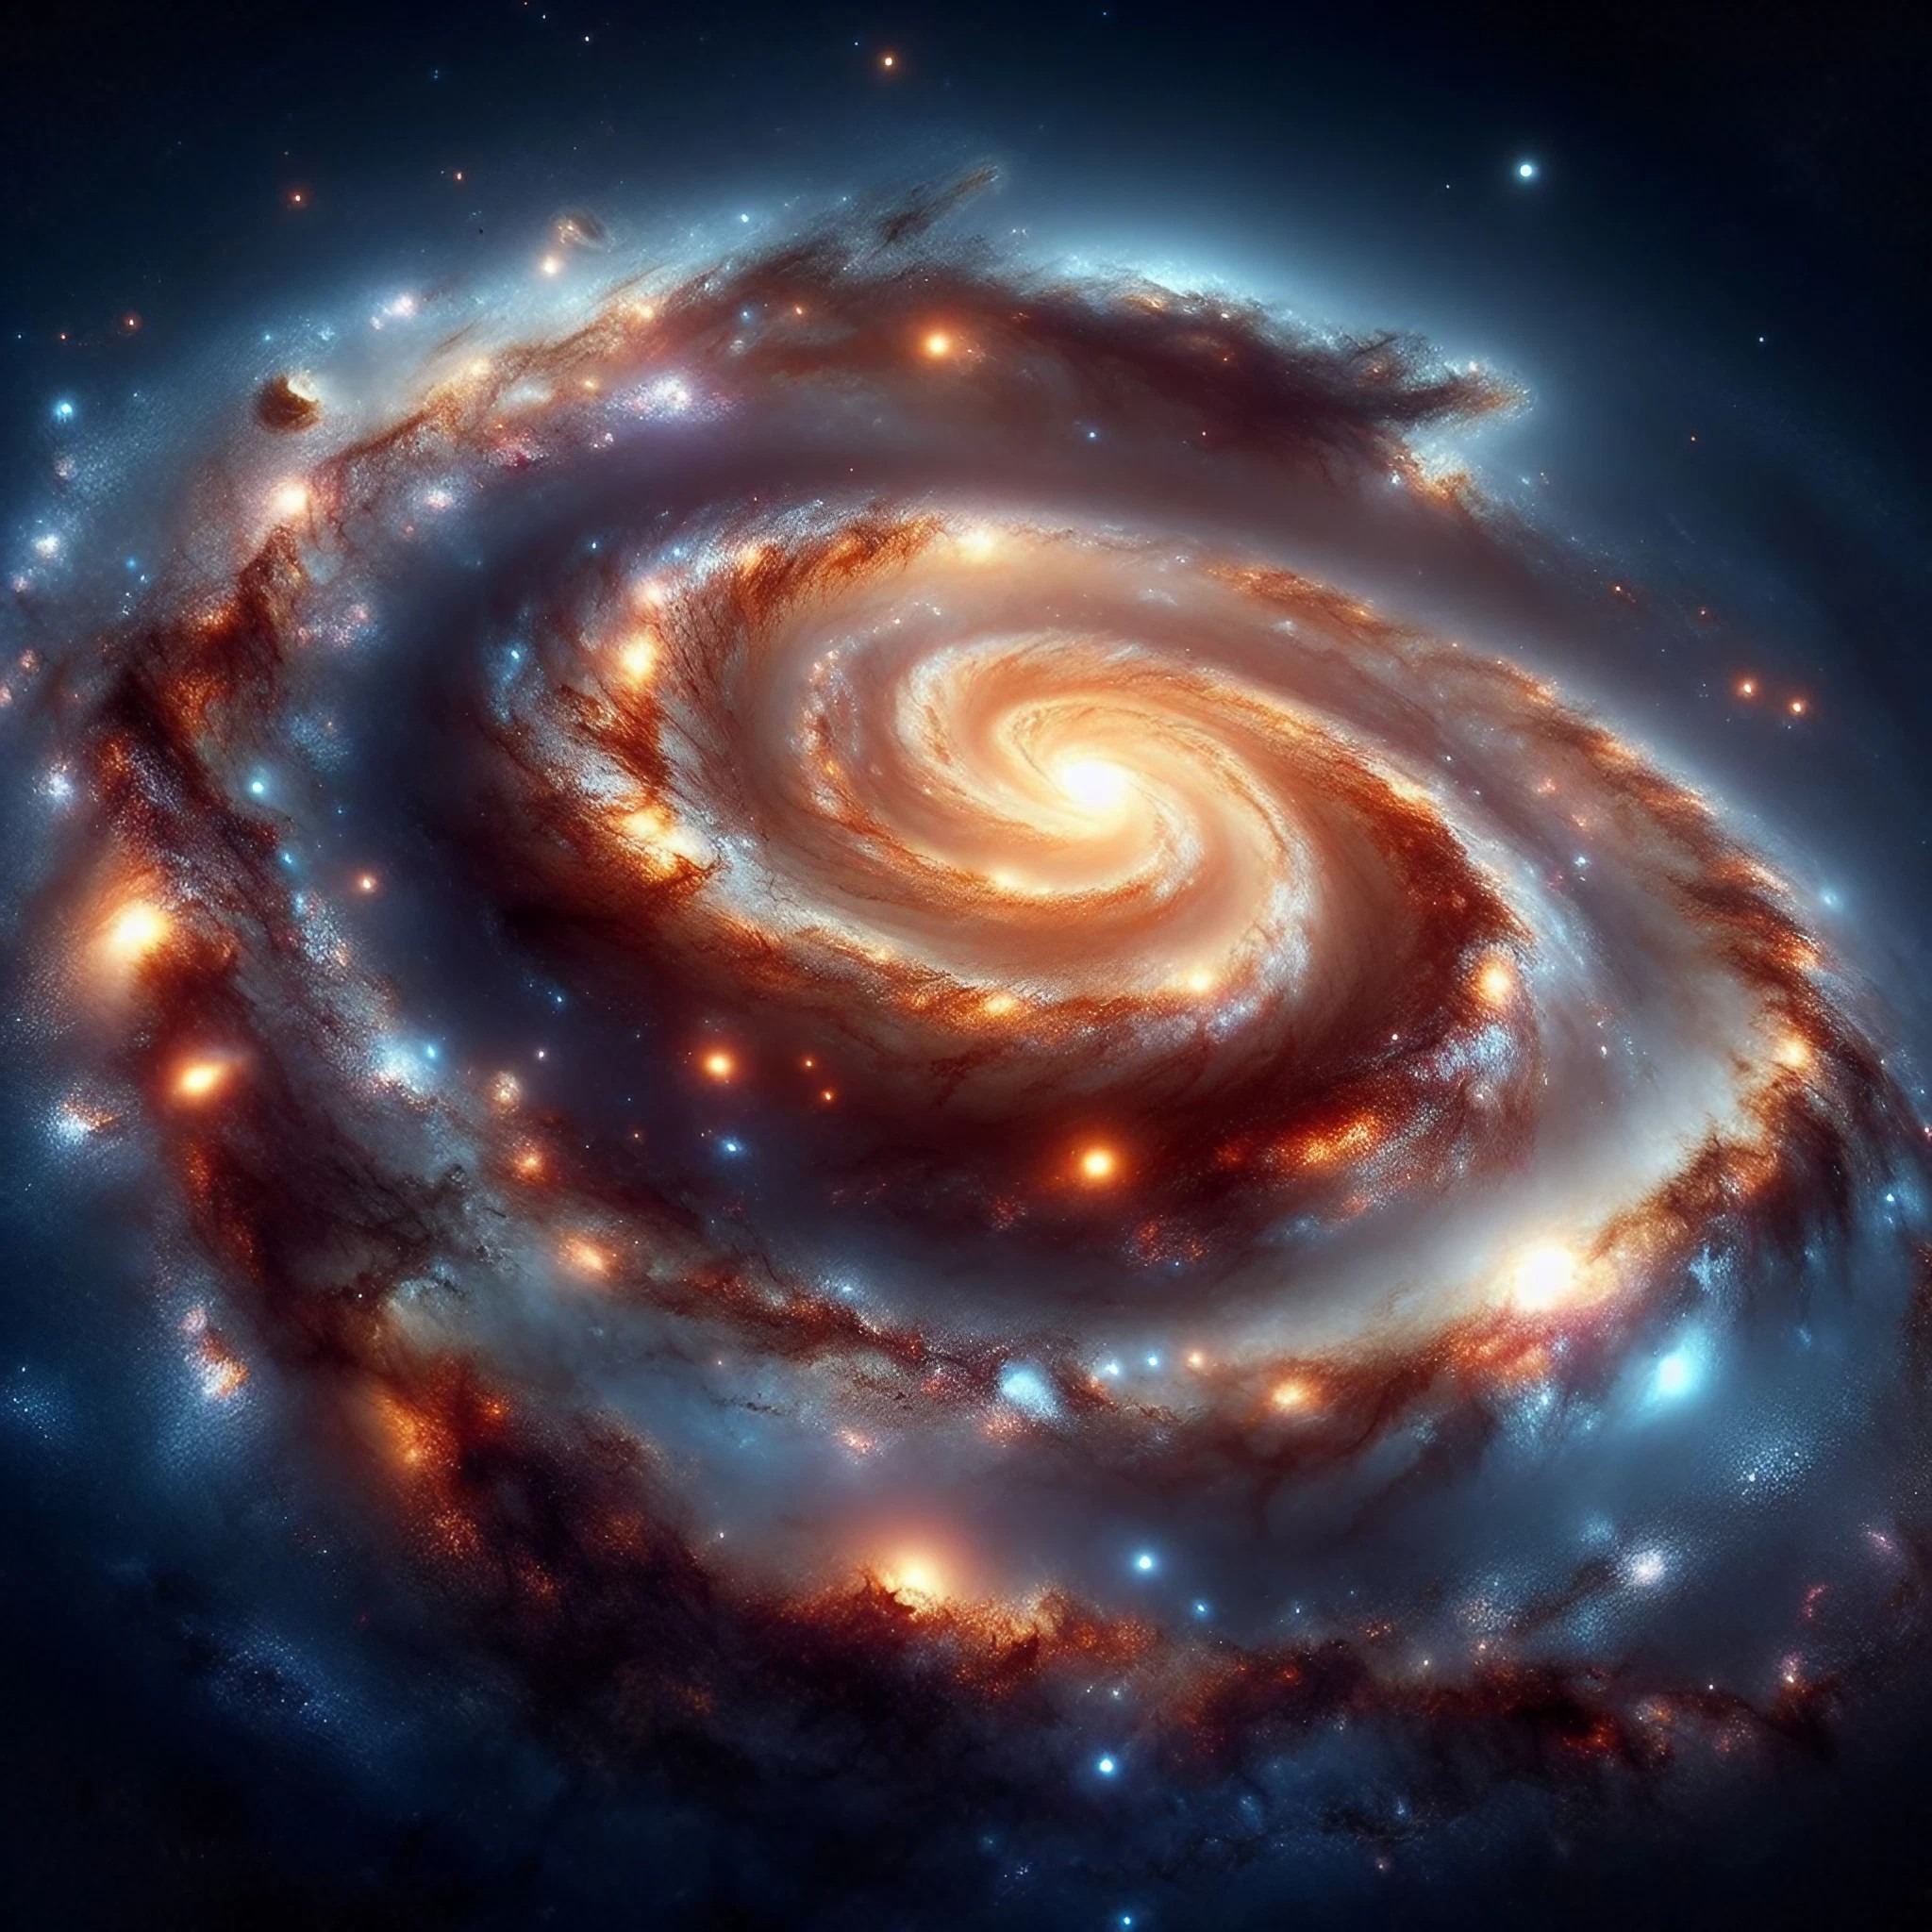 78: Galaxy formation and evolution